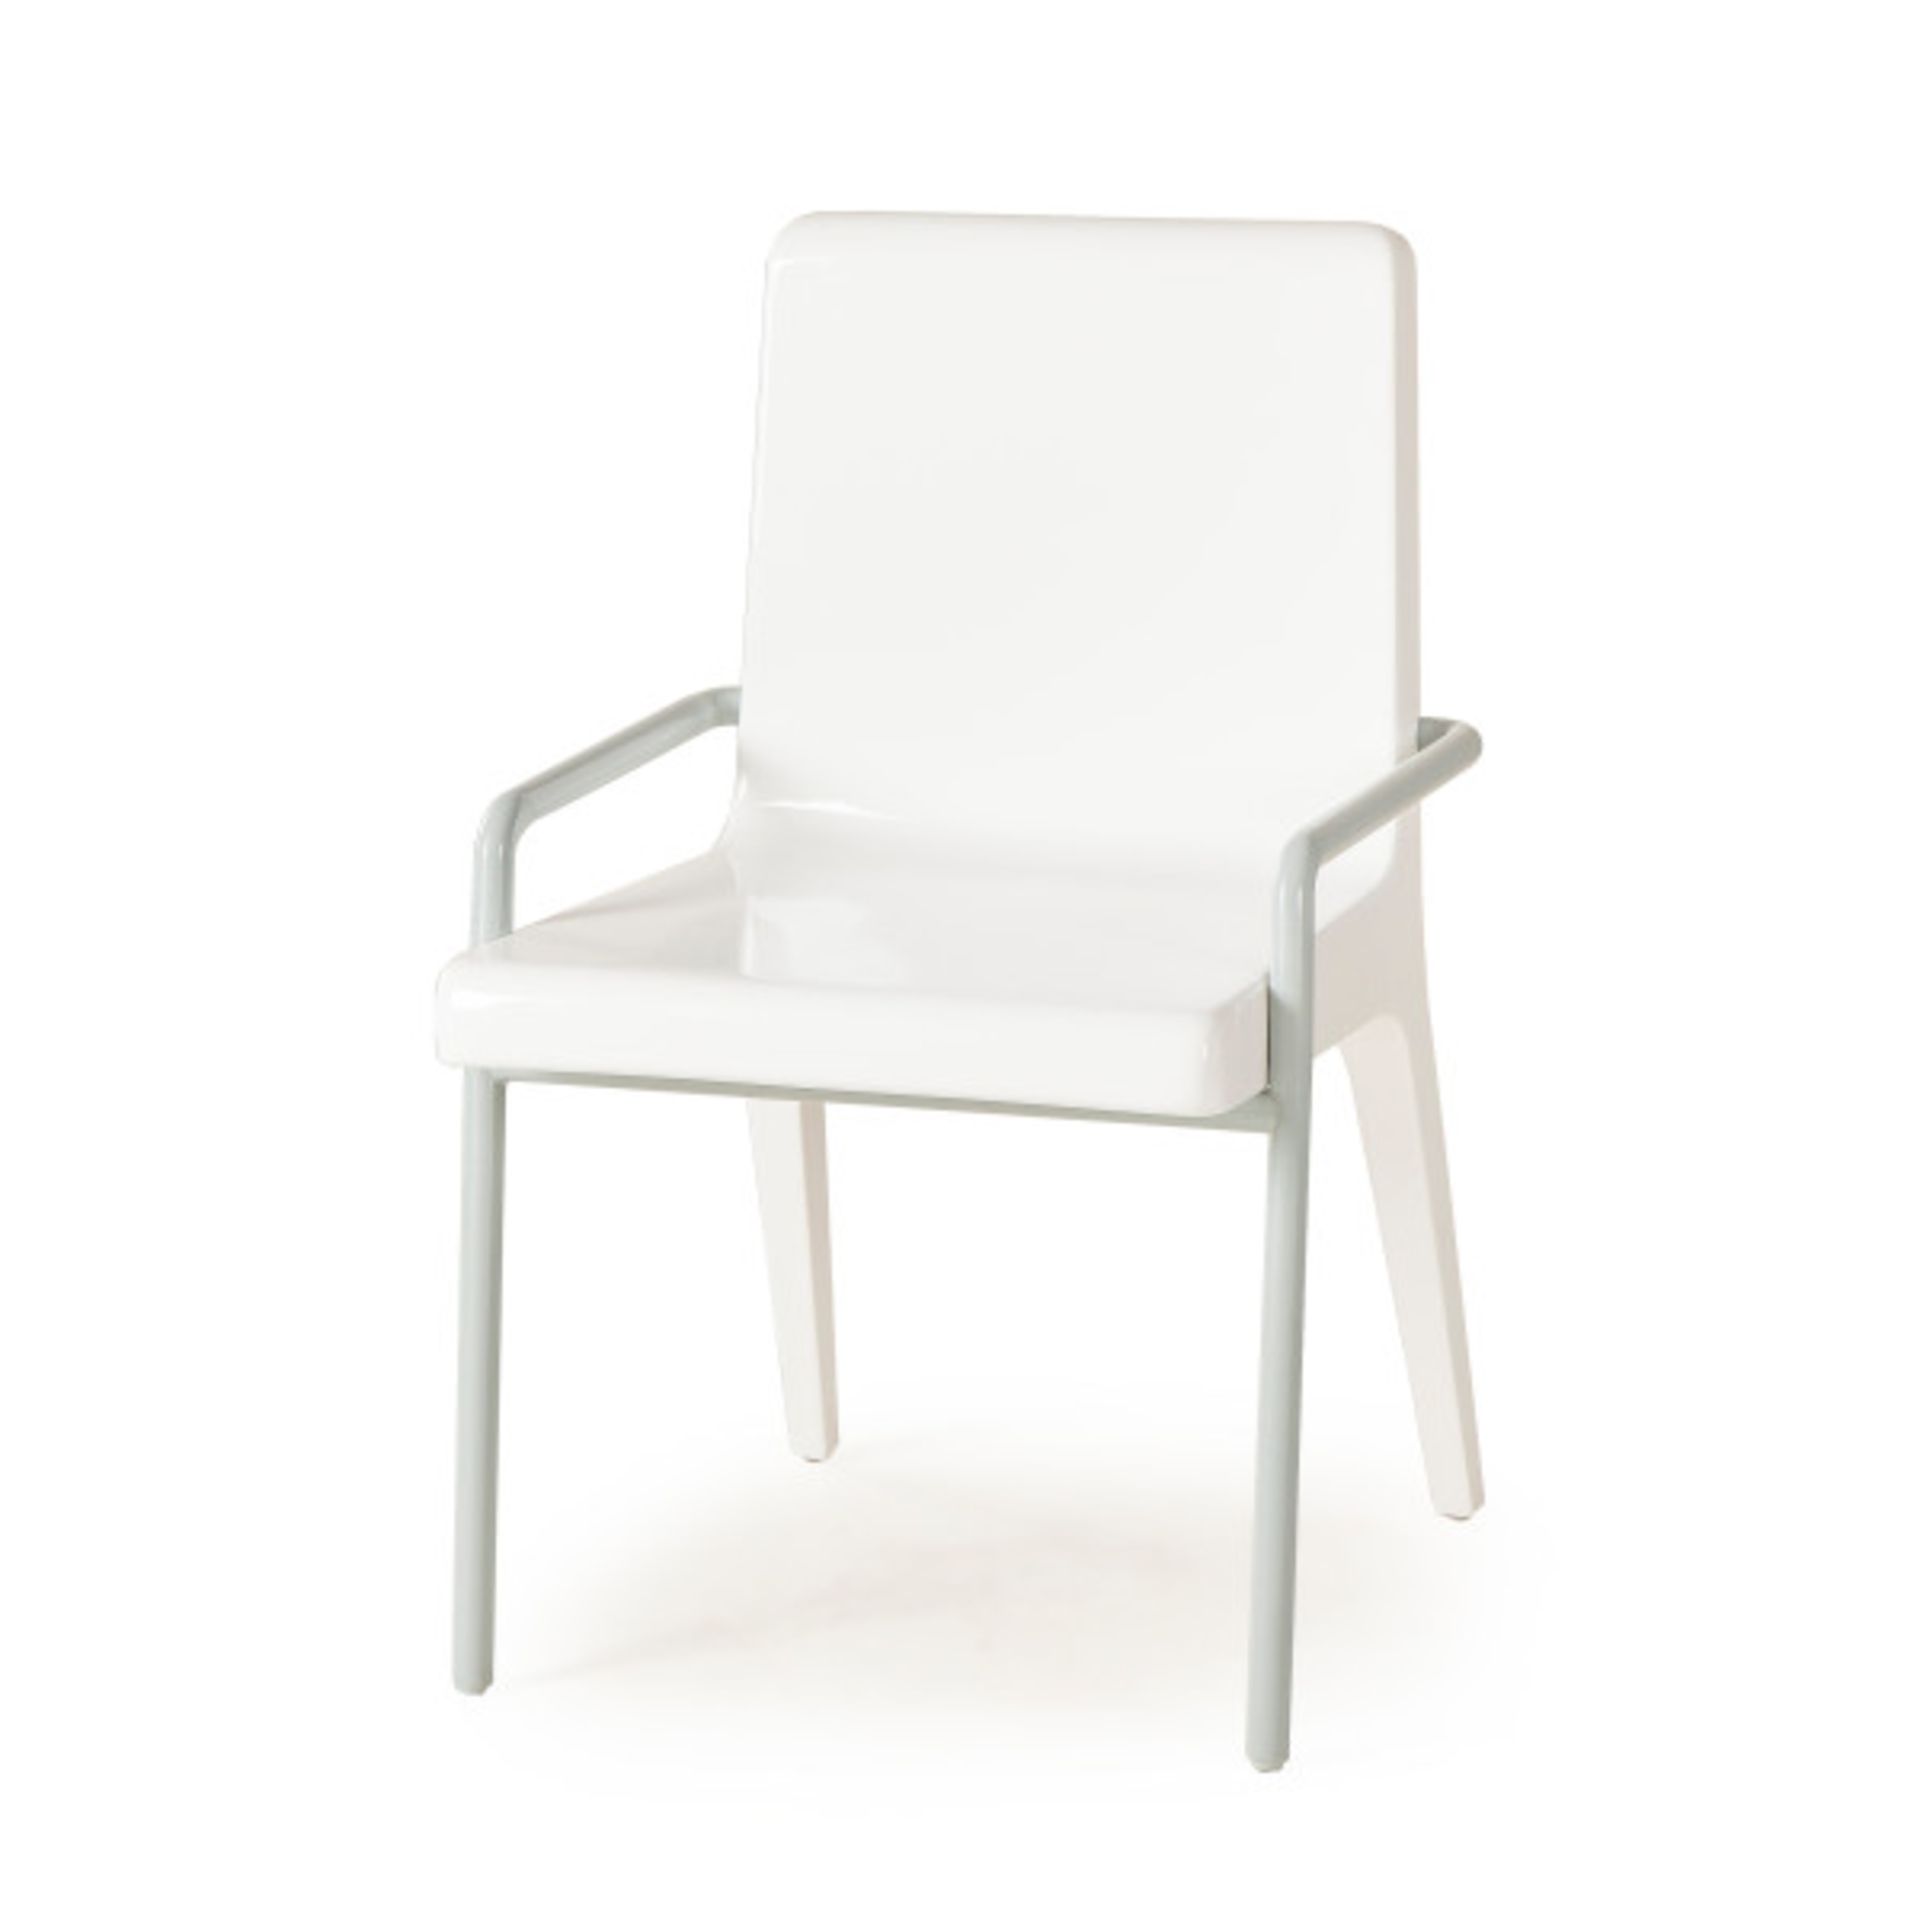 Tracey Boyd Eden Chair 80 x 81 x 79 CMMSRP £806 - Image 2 of 2